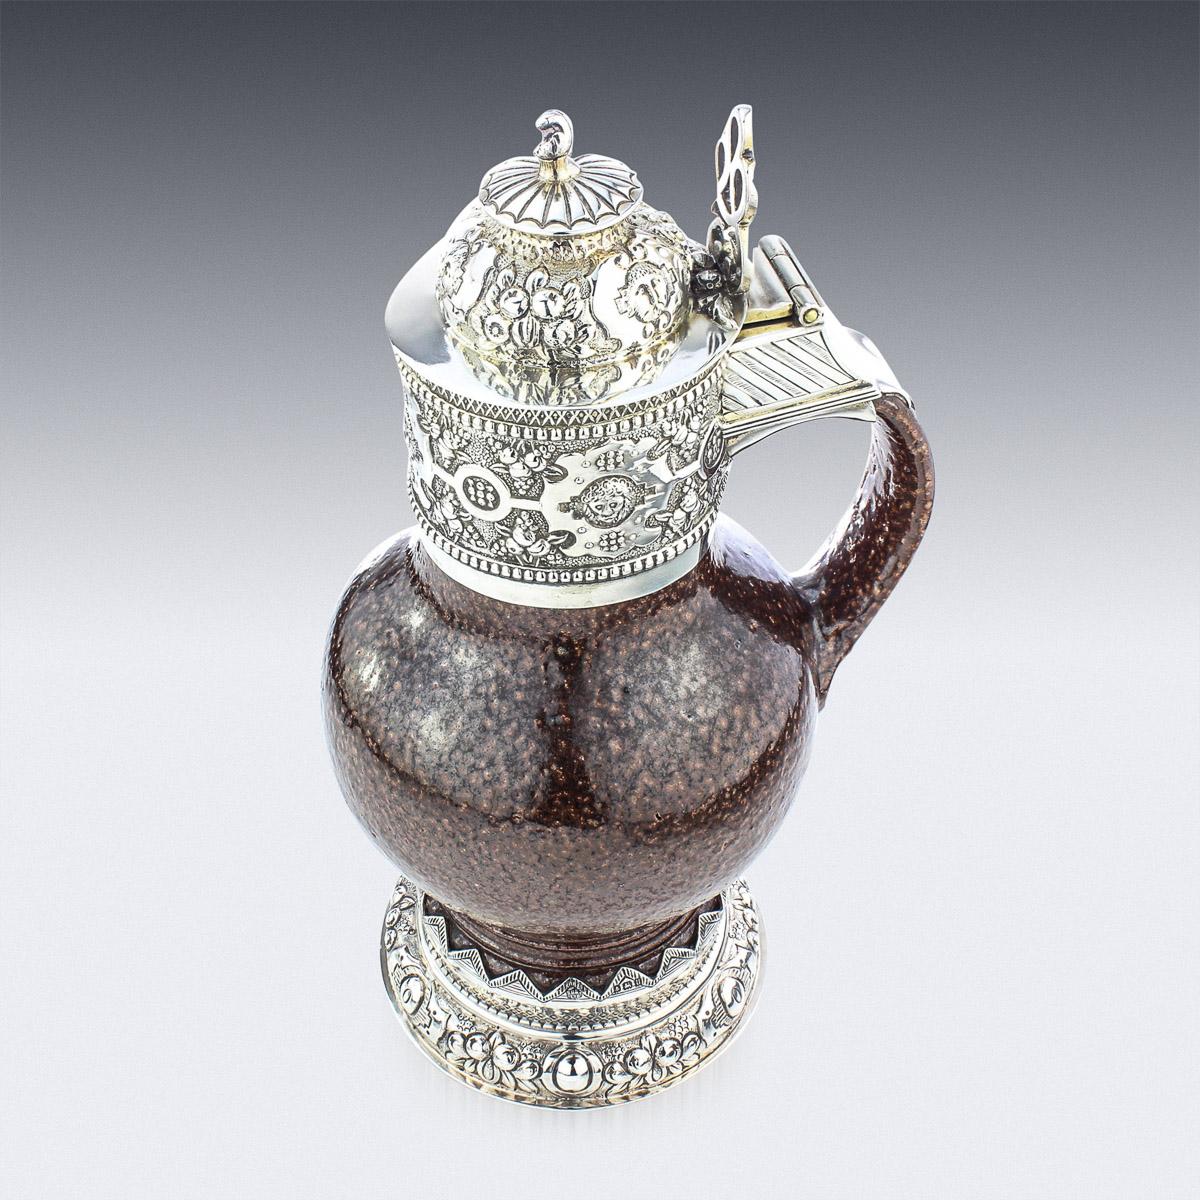 Antique 20th century English solid silver mounted on tigerware pottery wine jug, made in the style of the original Elizabeth I example, highly chased and gilt throughout. Hallmarked English silver (925 standard), Birmingham, year 1919 (u), Maker